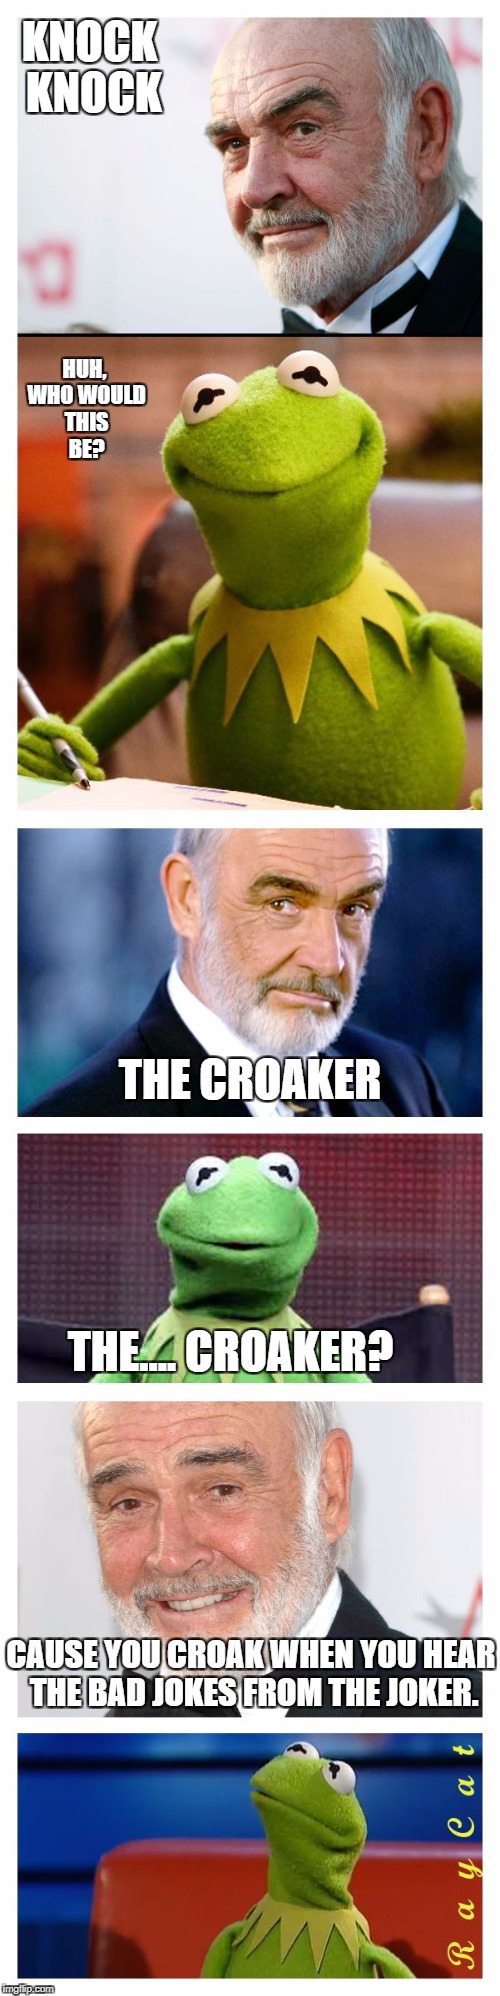 Sean and Kermit | KNOCK KNOCK; HUH, WHO WOULD THIS BE? THE CROAKER; THE.... CROAKER? CAUSE YOU CROAK WHEN YOU HEAR THE BAD JOKES FROM THE JOKER. | image tagged in sean and kermit | made w/ Imgflip meme maker